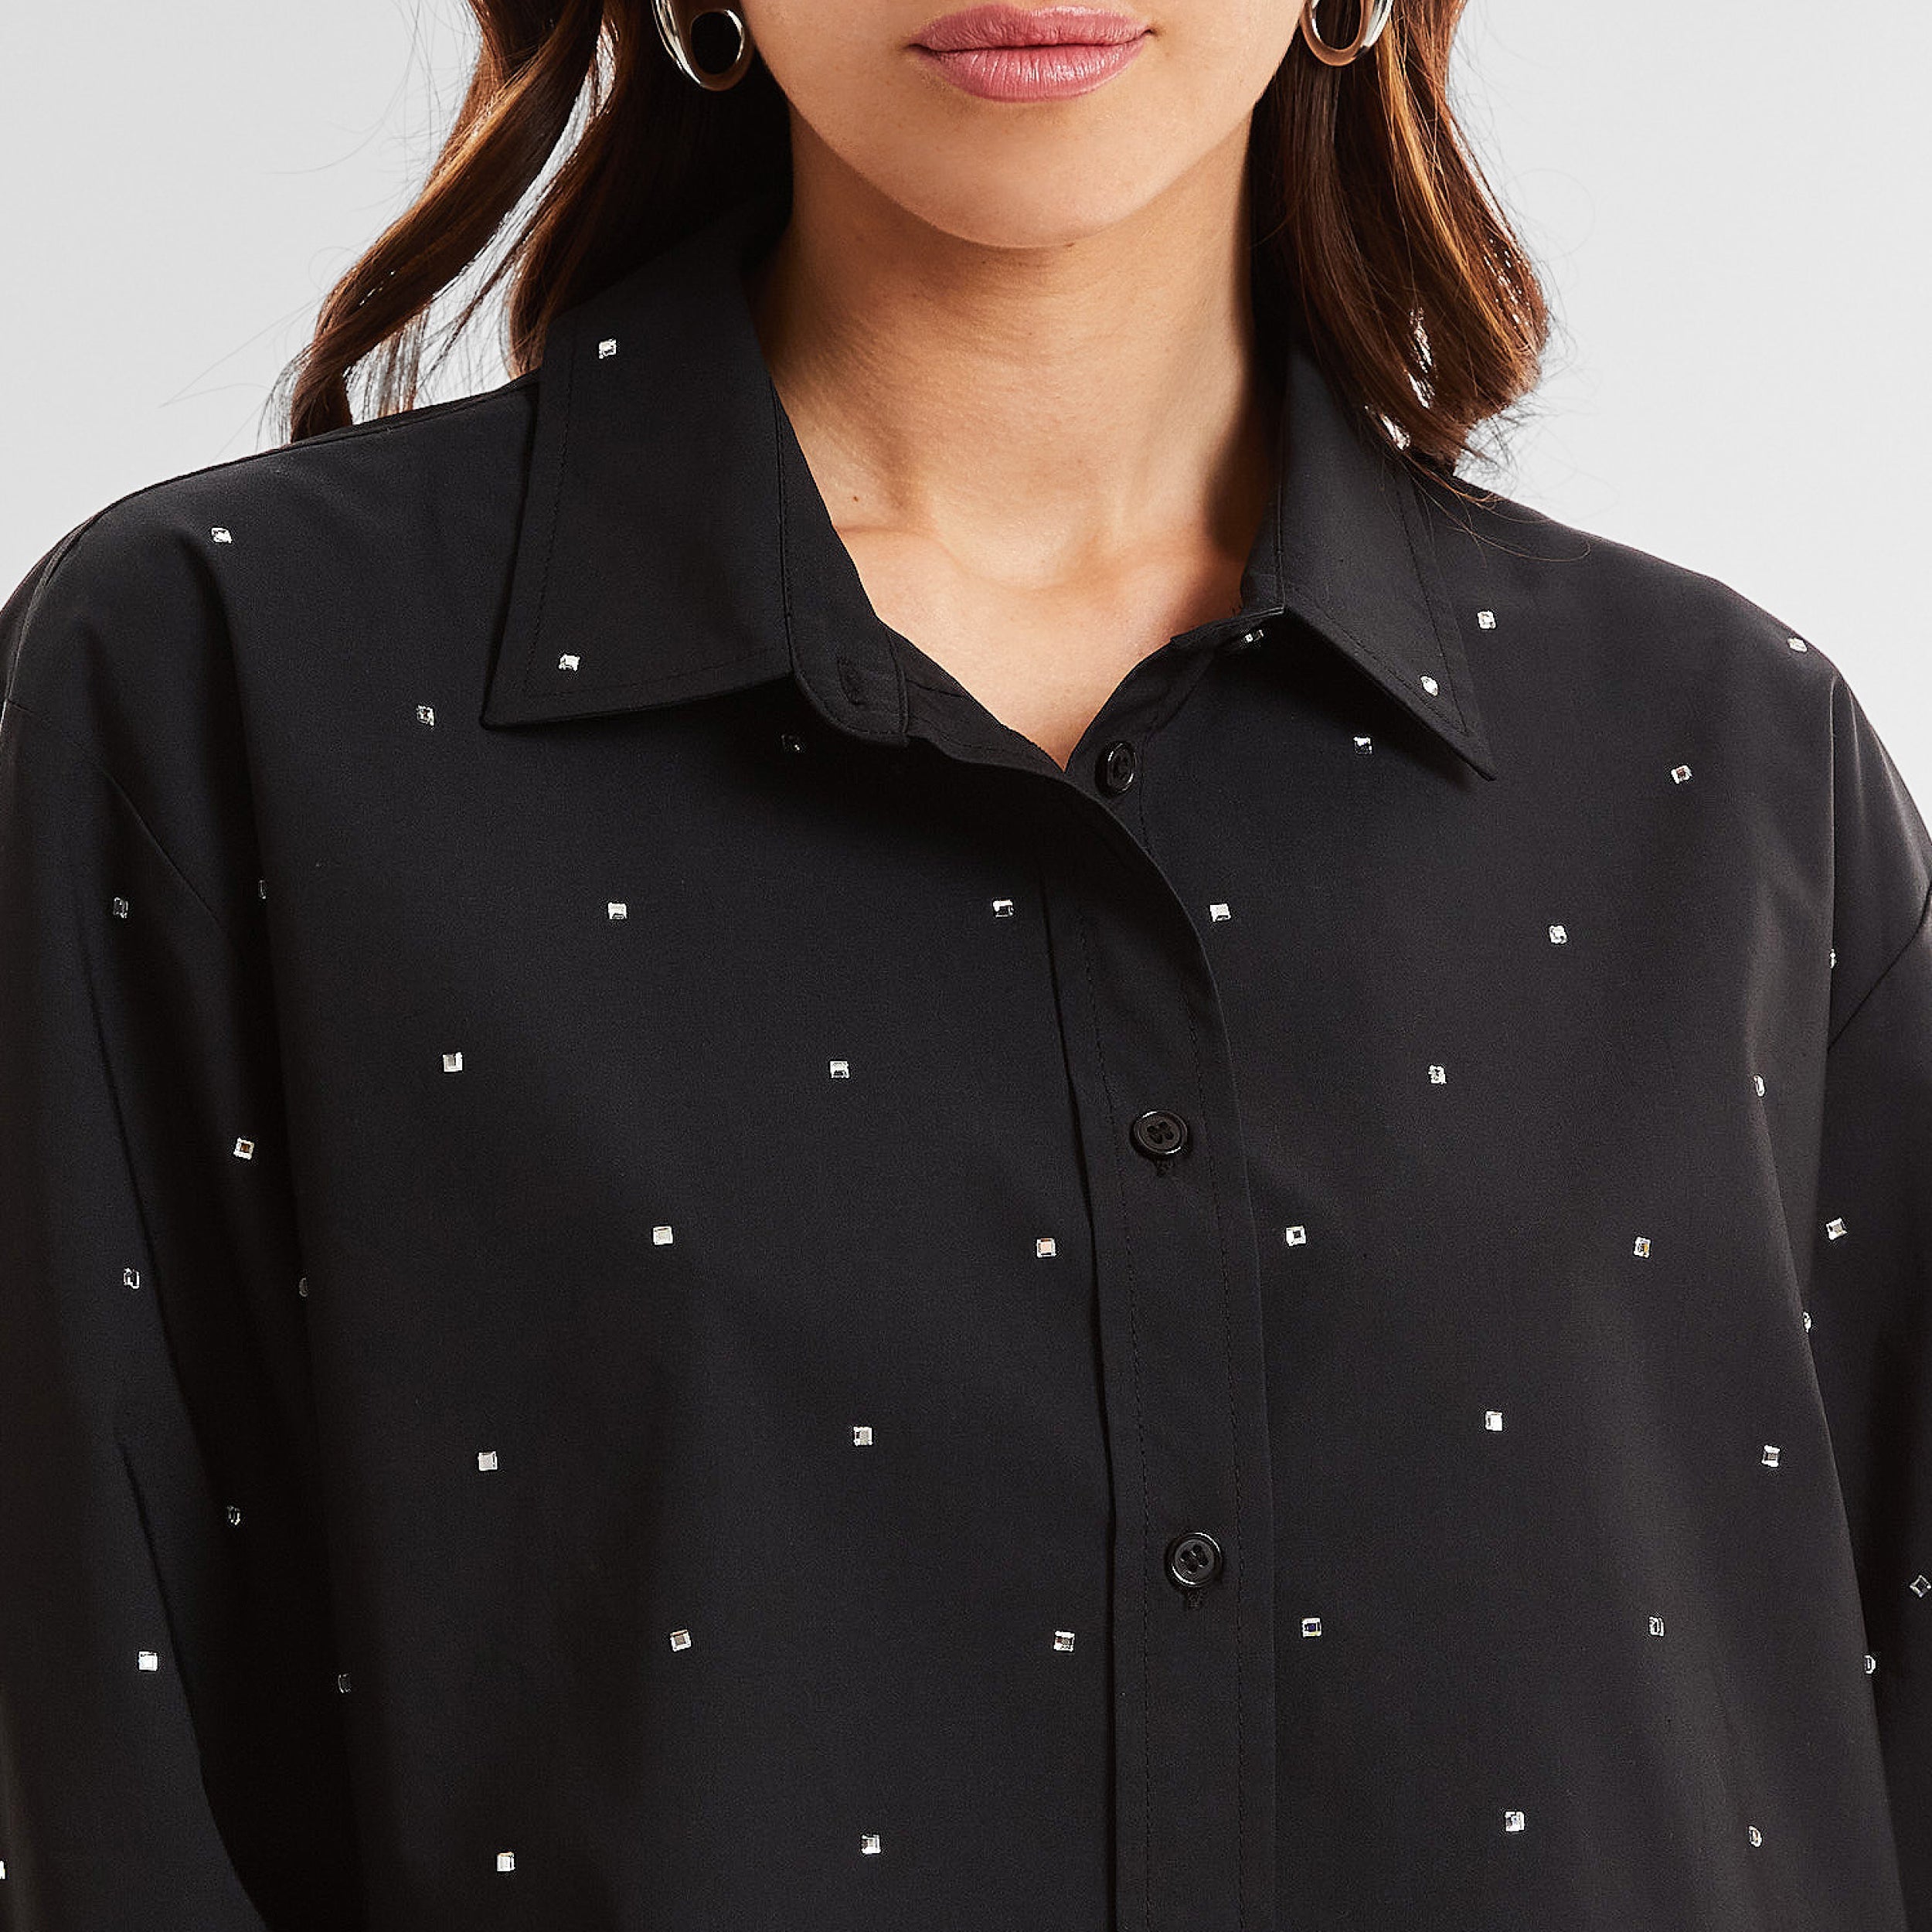 Close-up front view of woman wearing a black cropped button down shirt with crystal embellishments.